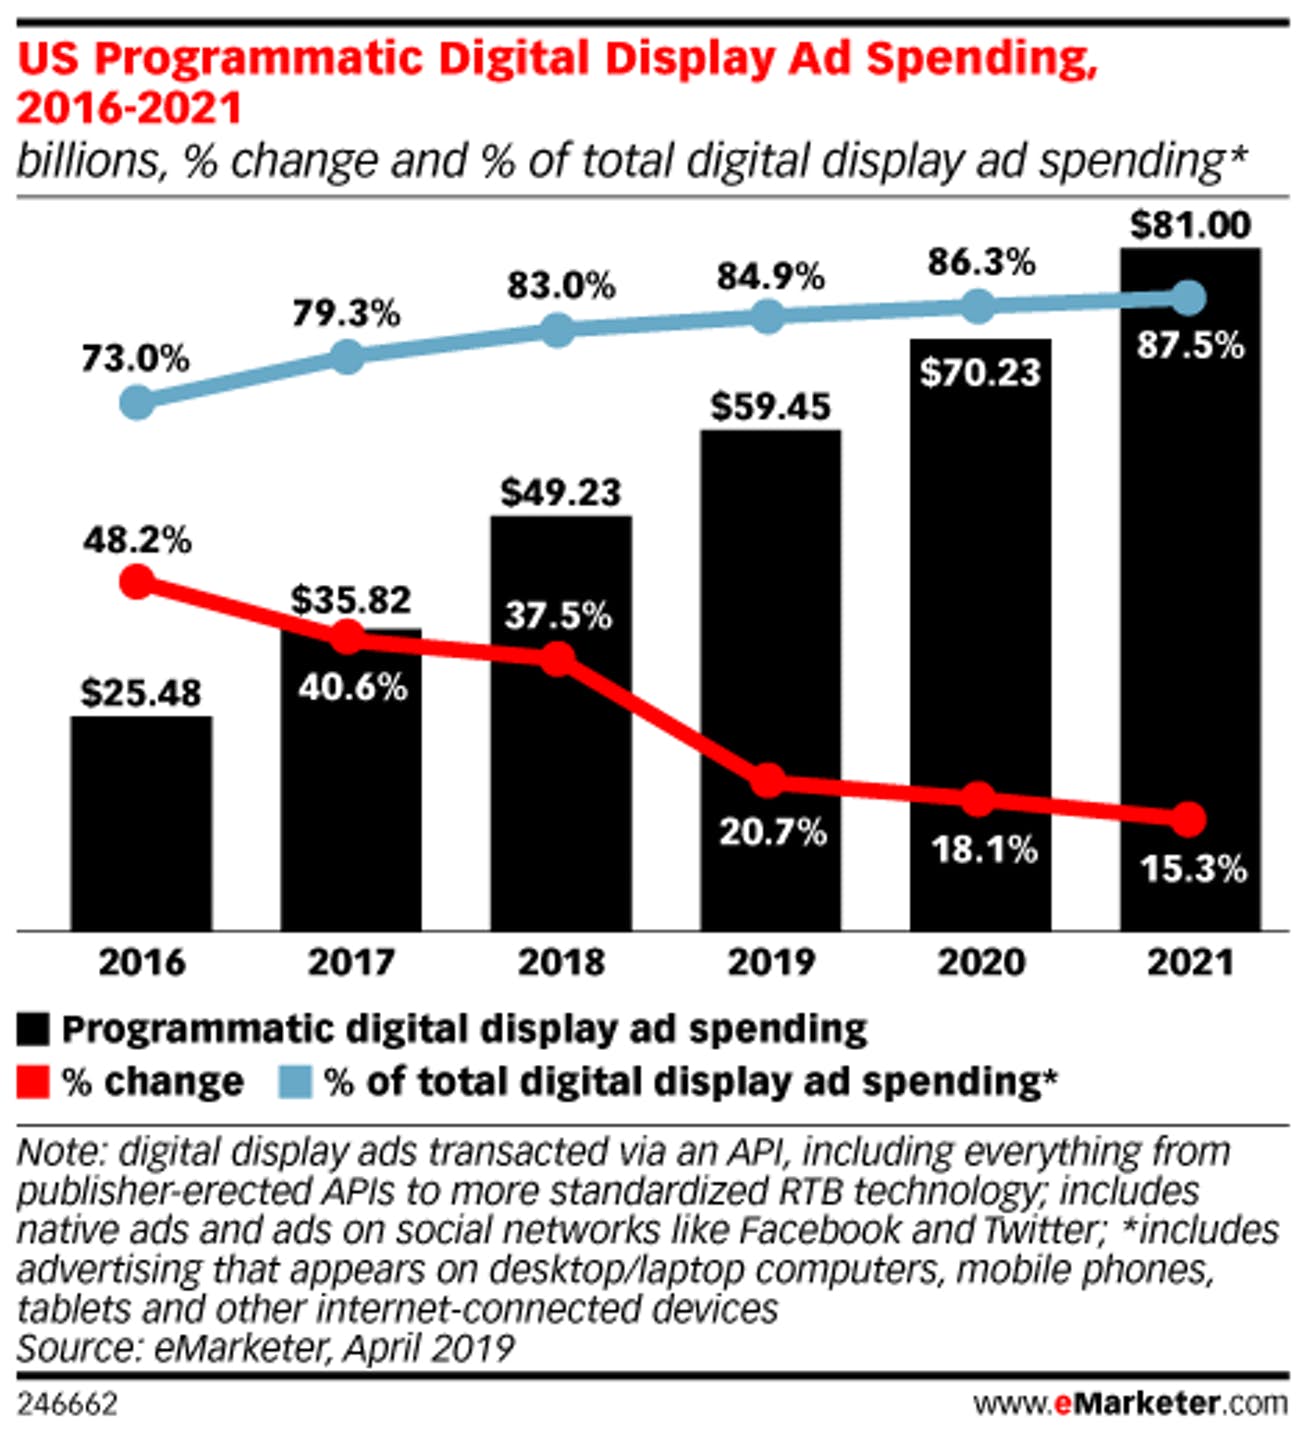 Programmatic Ad spending growth in US | VDO.AI
